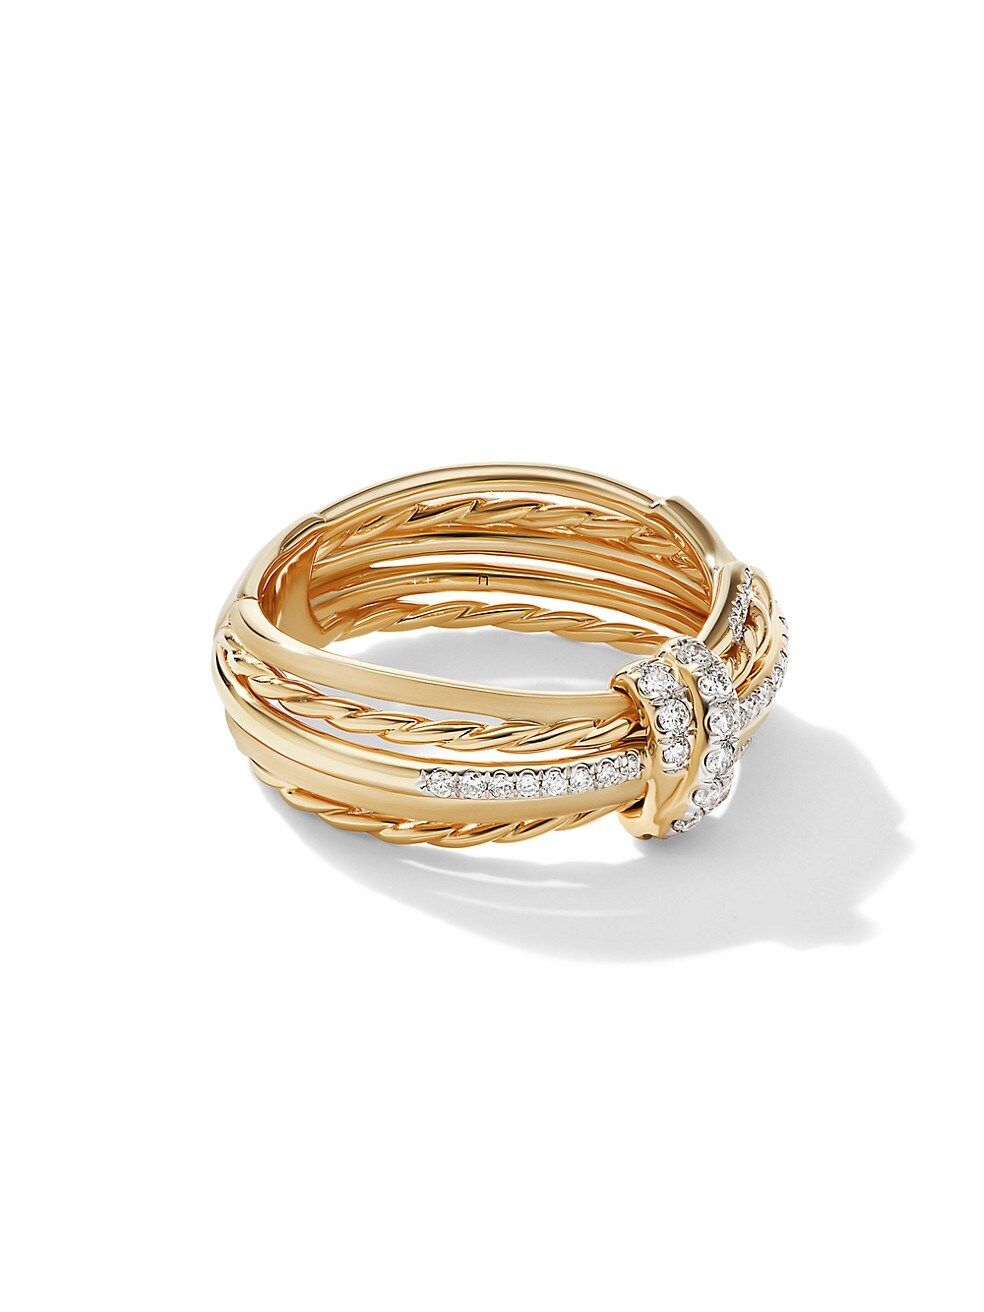 Angelika Ring In 18K Yellow Gold With Pavé Diamonds | Saks Fifth Avenue